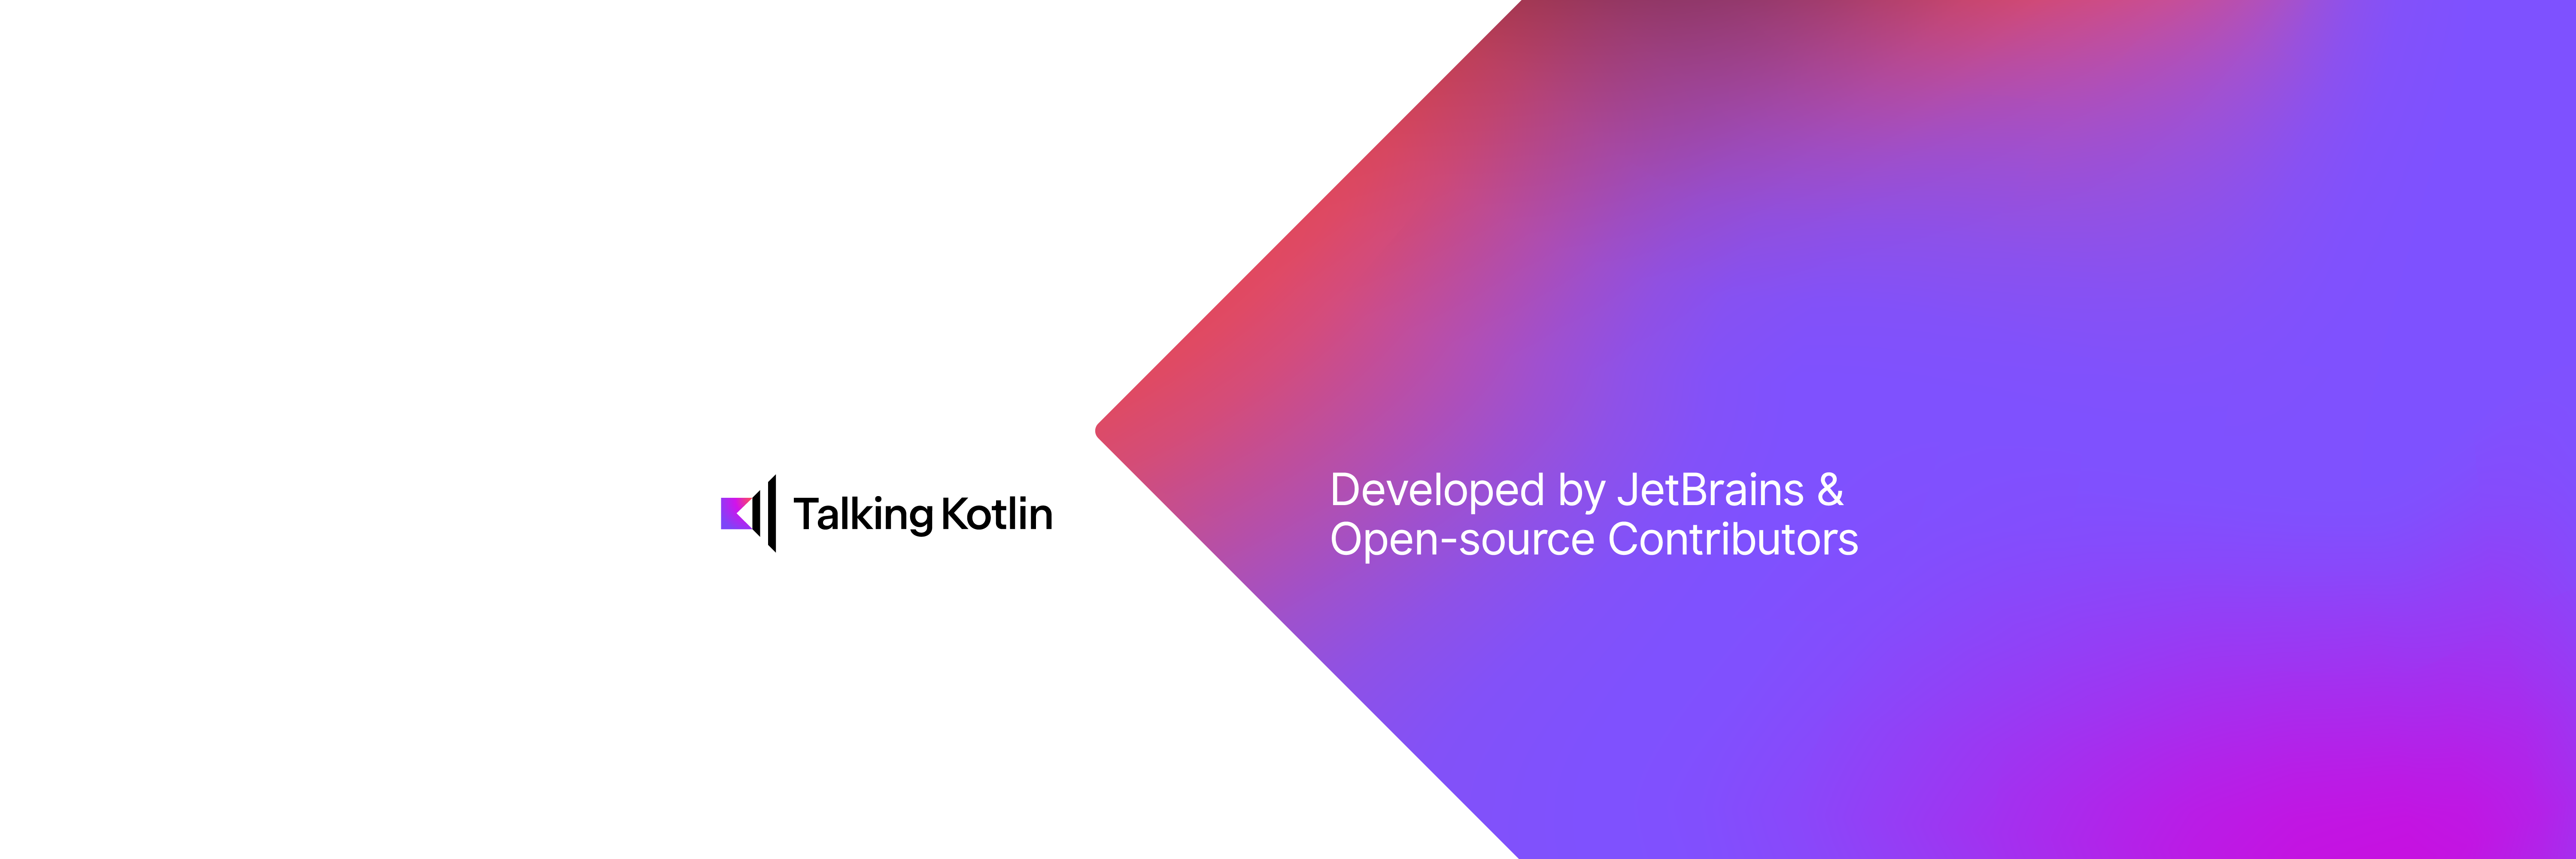 From Java to Kotlin